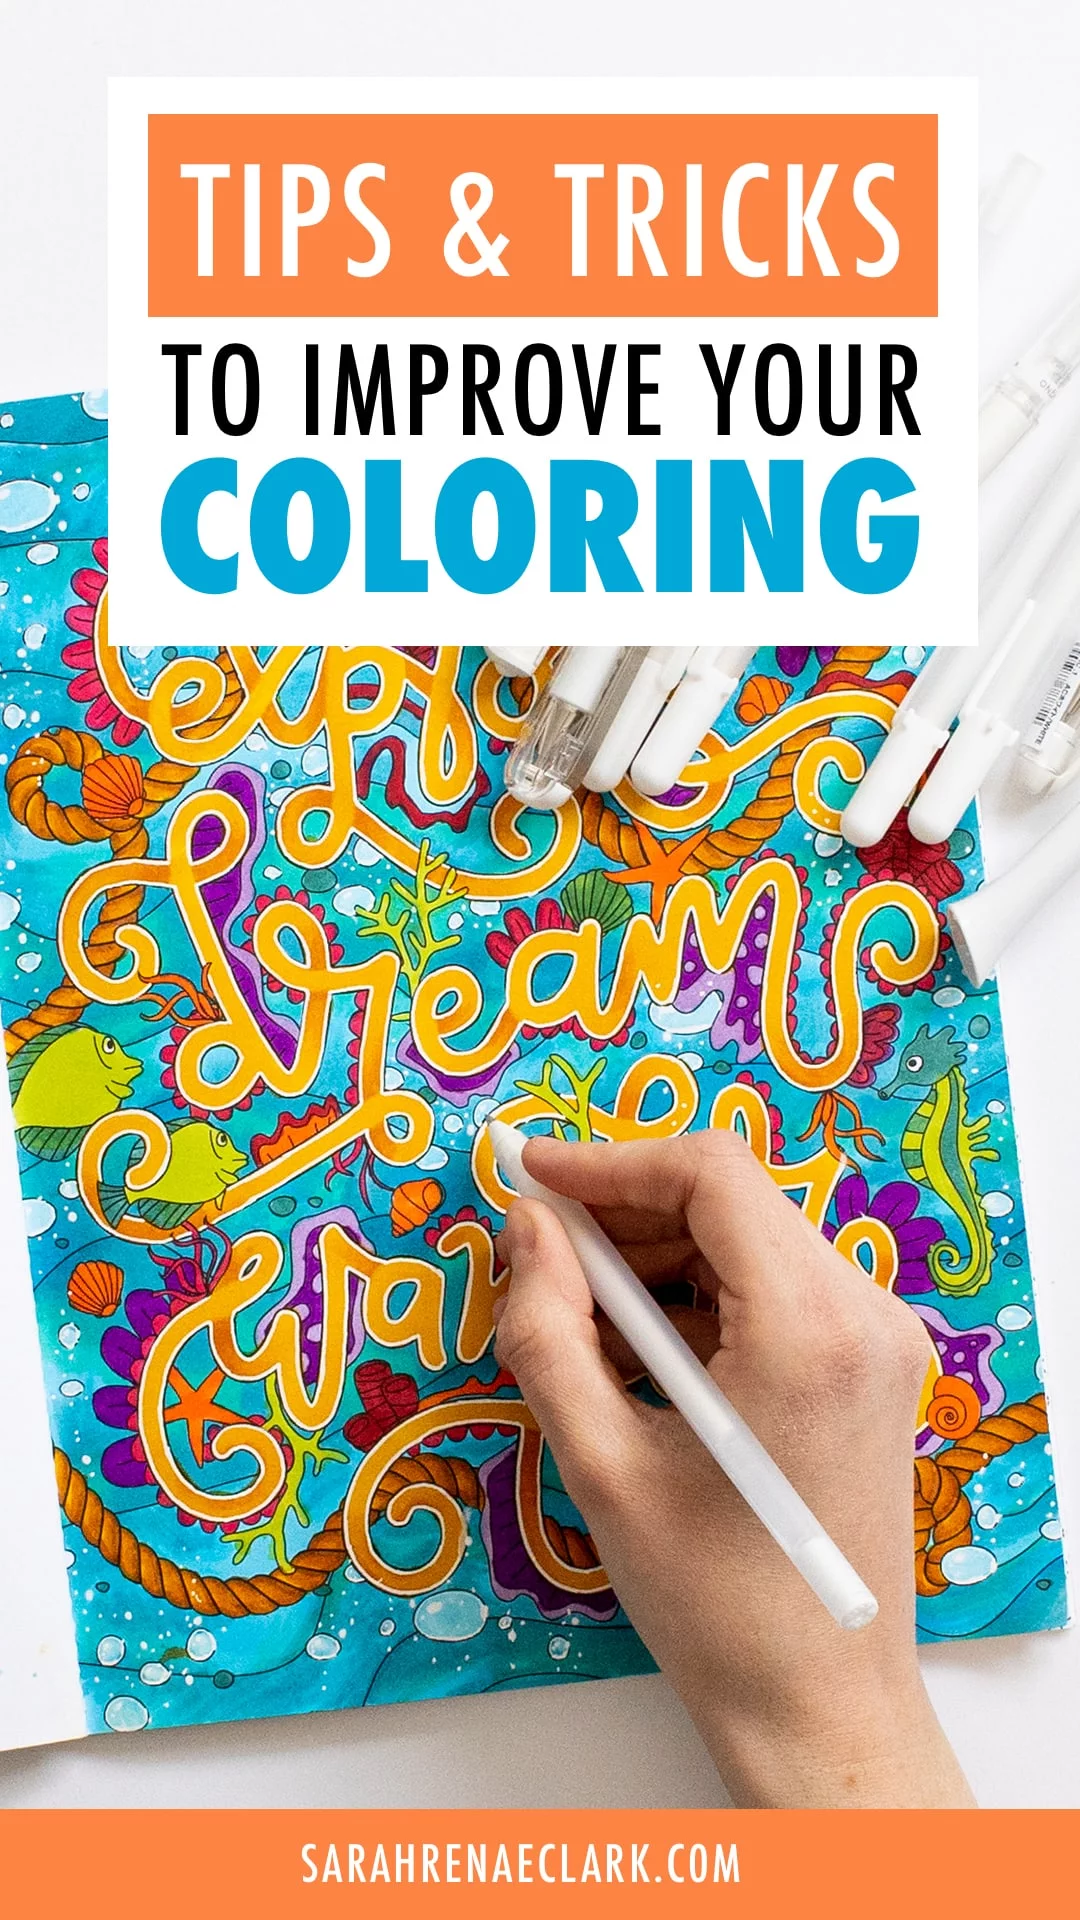 How to Color in a Coloring Book: 15 Steps (with Pictures)